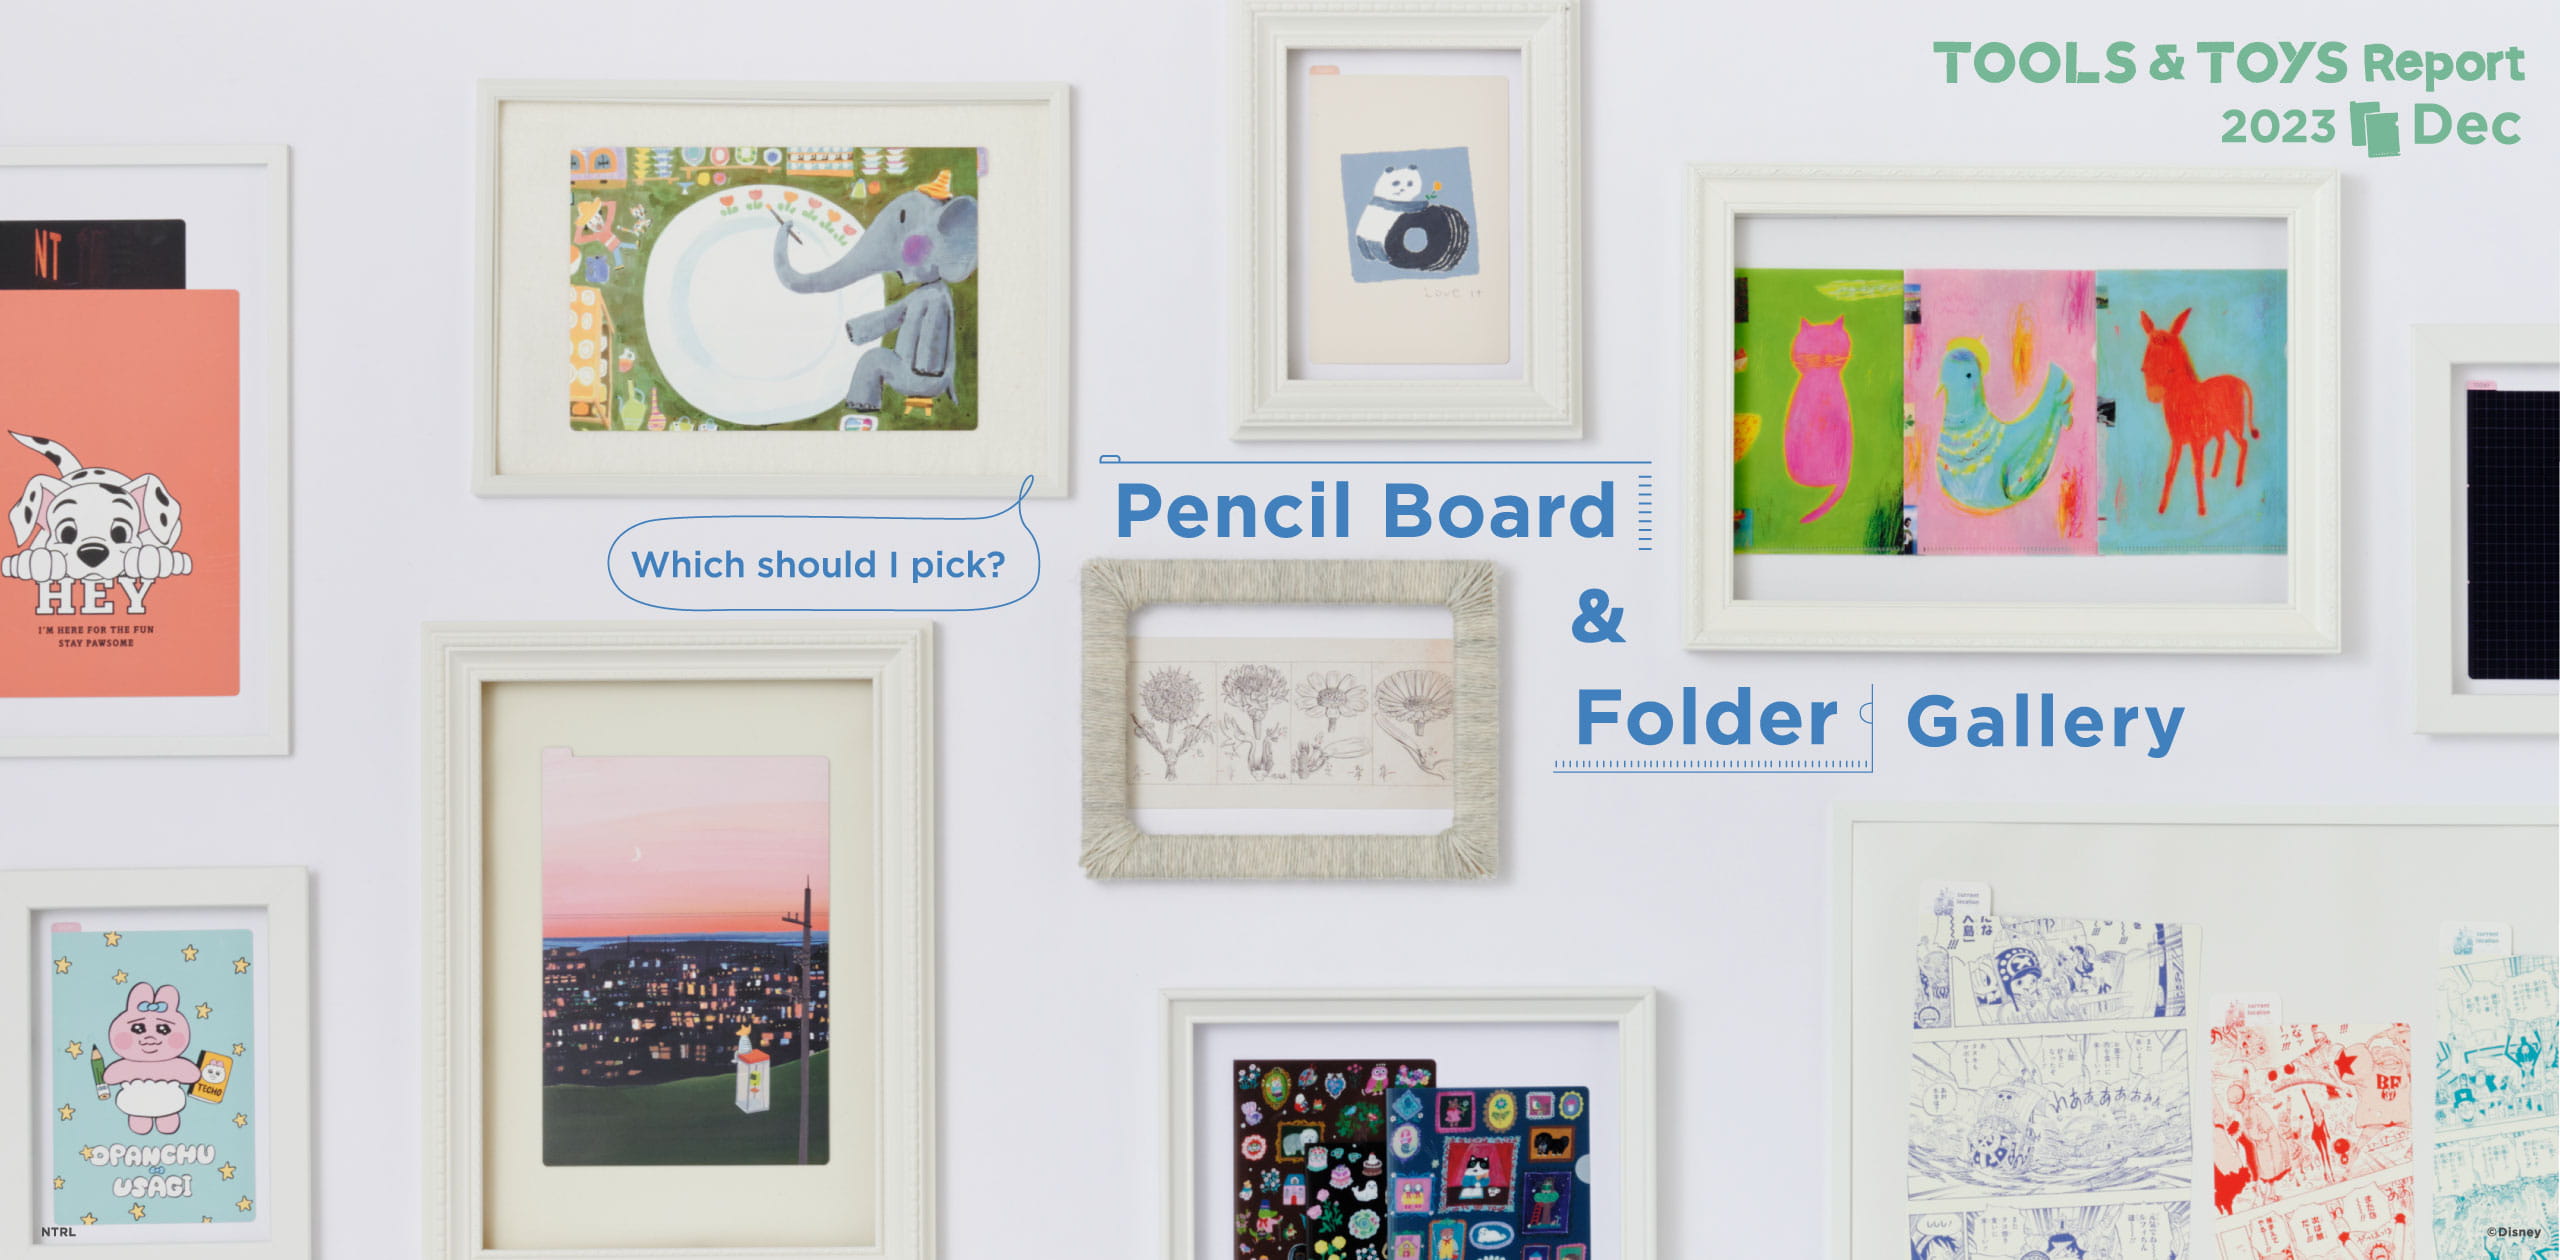 TOOLS&TOYS Report 2023 Dec
              Which should I pick?
              Pencil Board & Folder Gallery